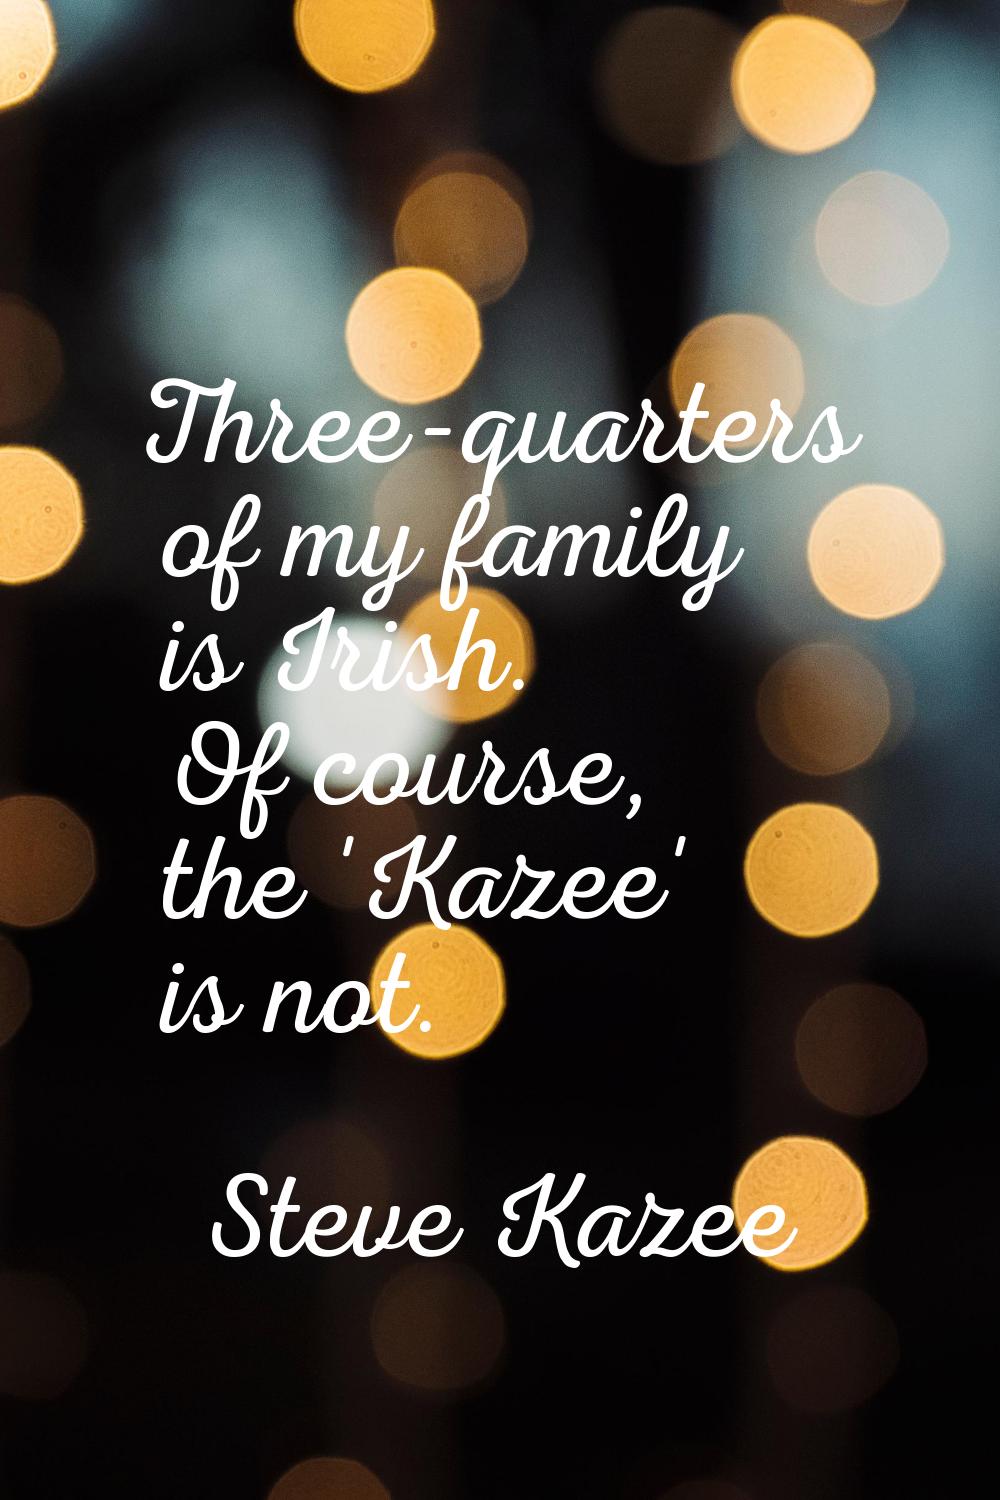 Three-quarters of my family is Irish. Of course, the 'Kazee' is not.